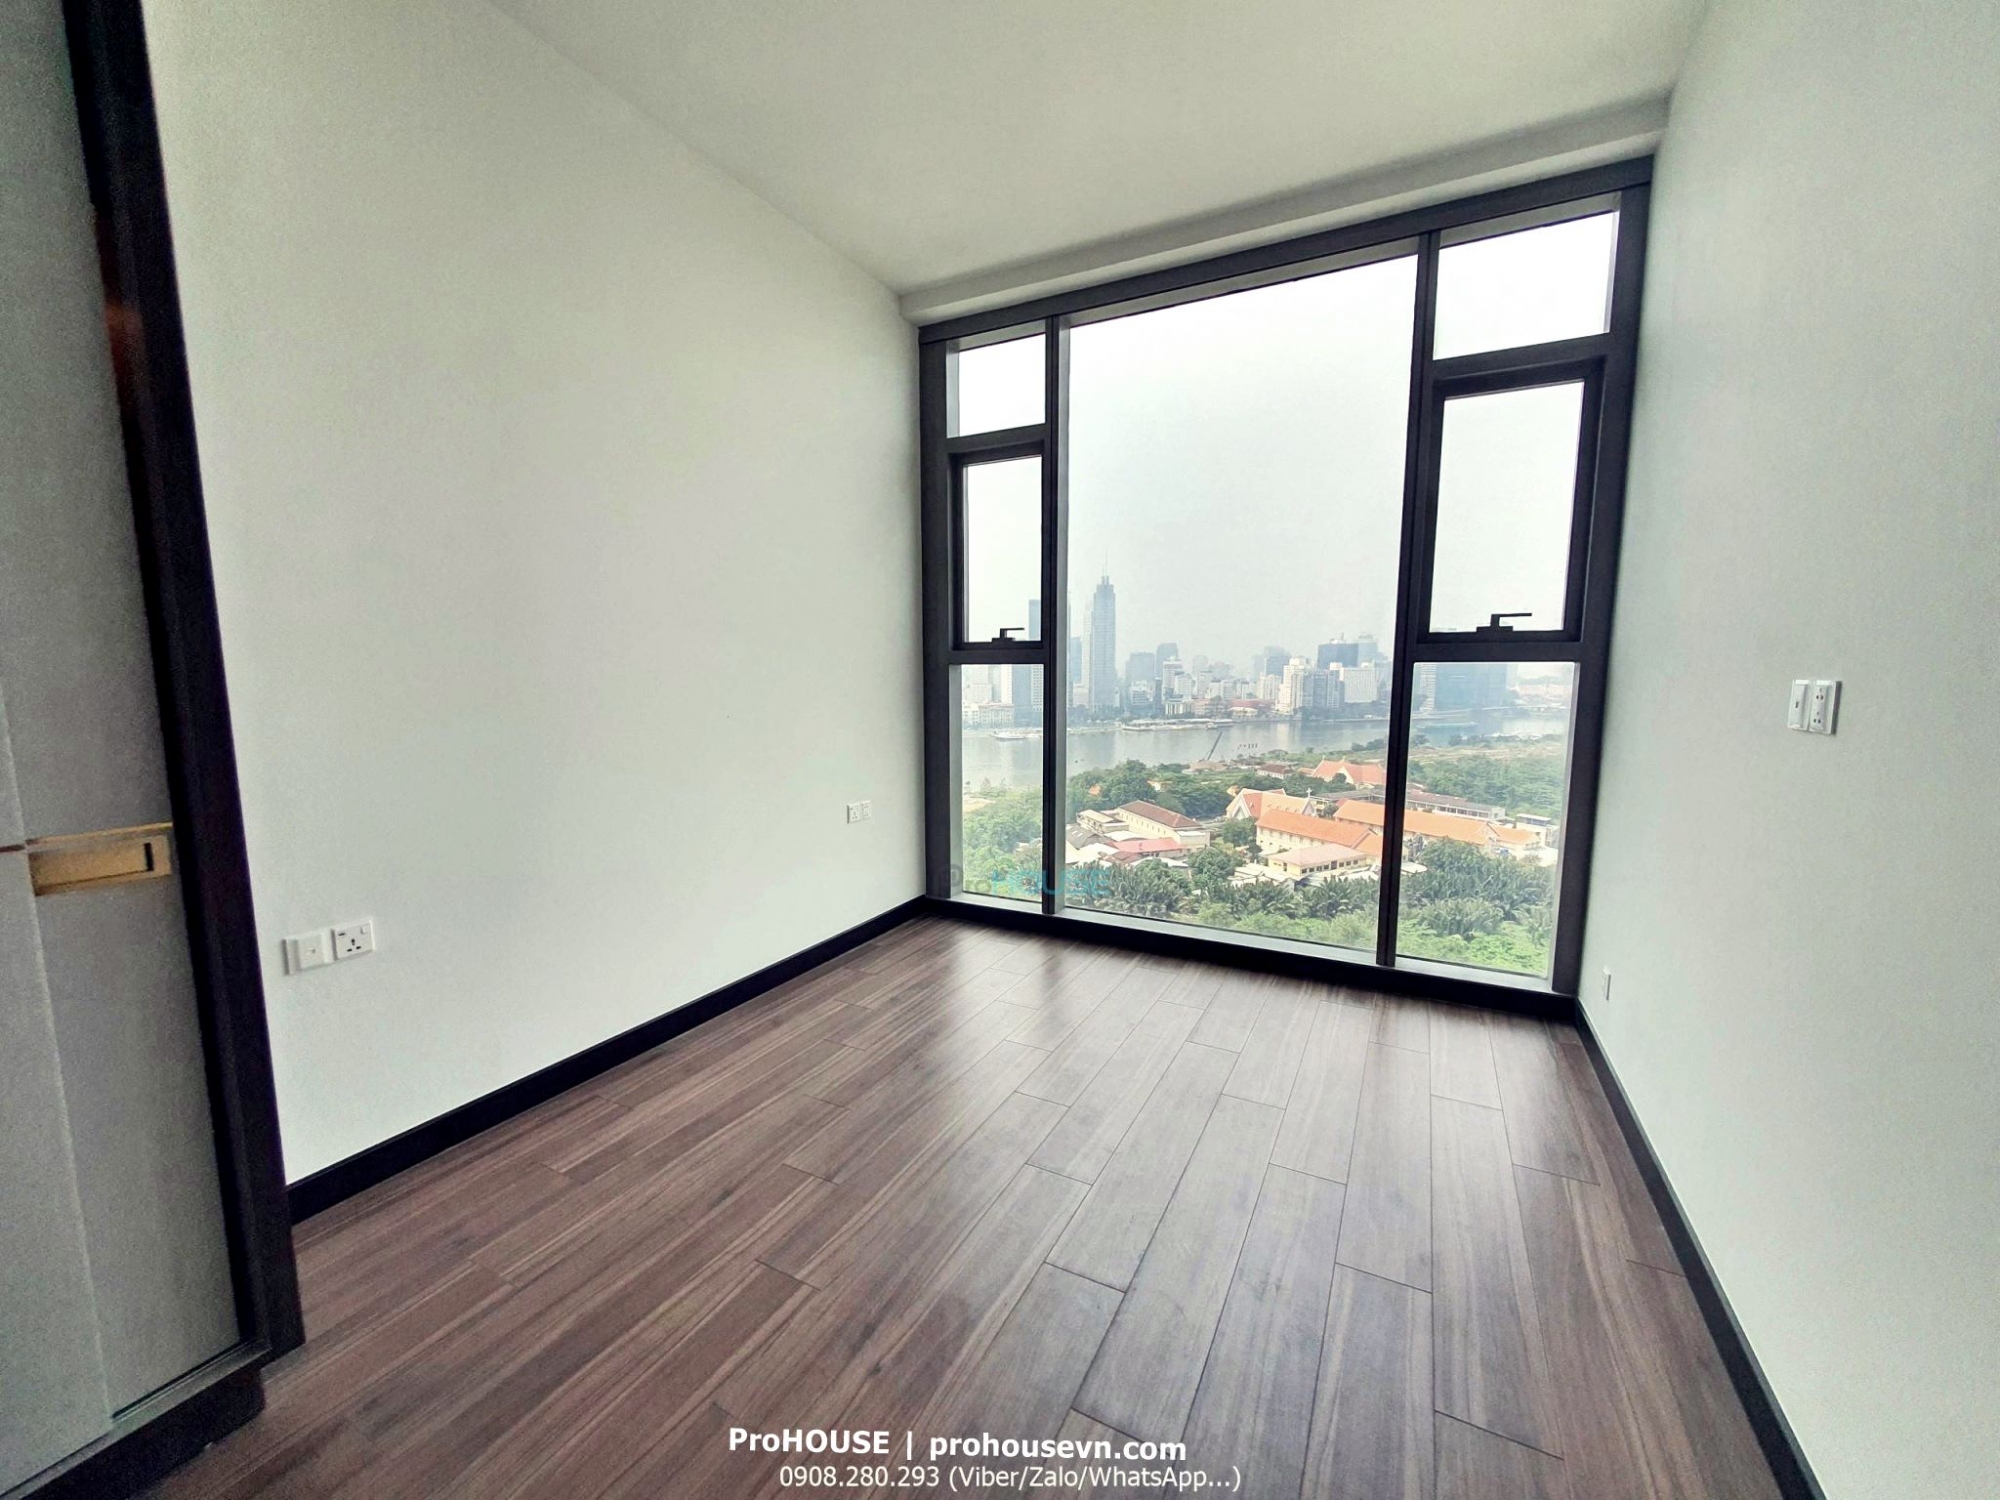 EMPIRE CITY 1BR APARTMENT FOR RENT 